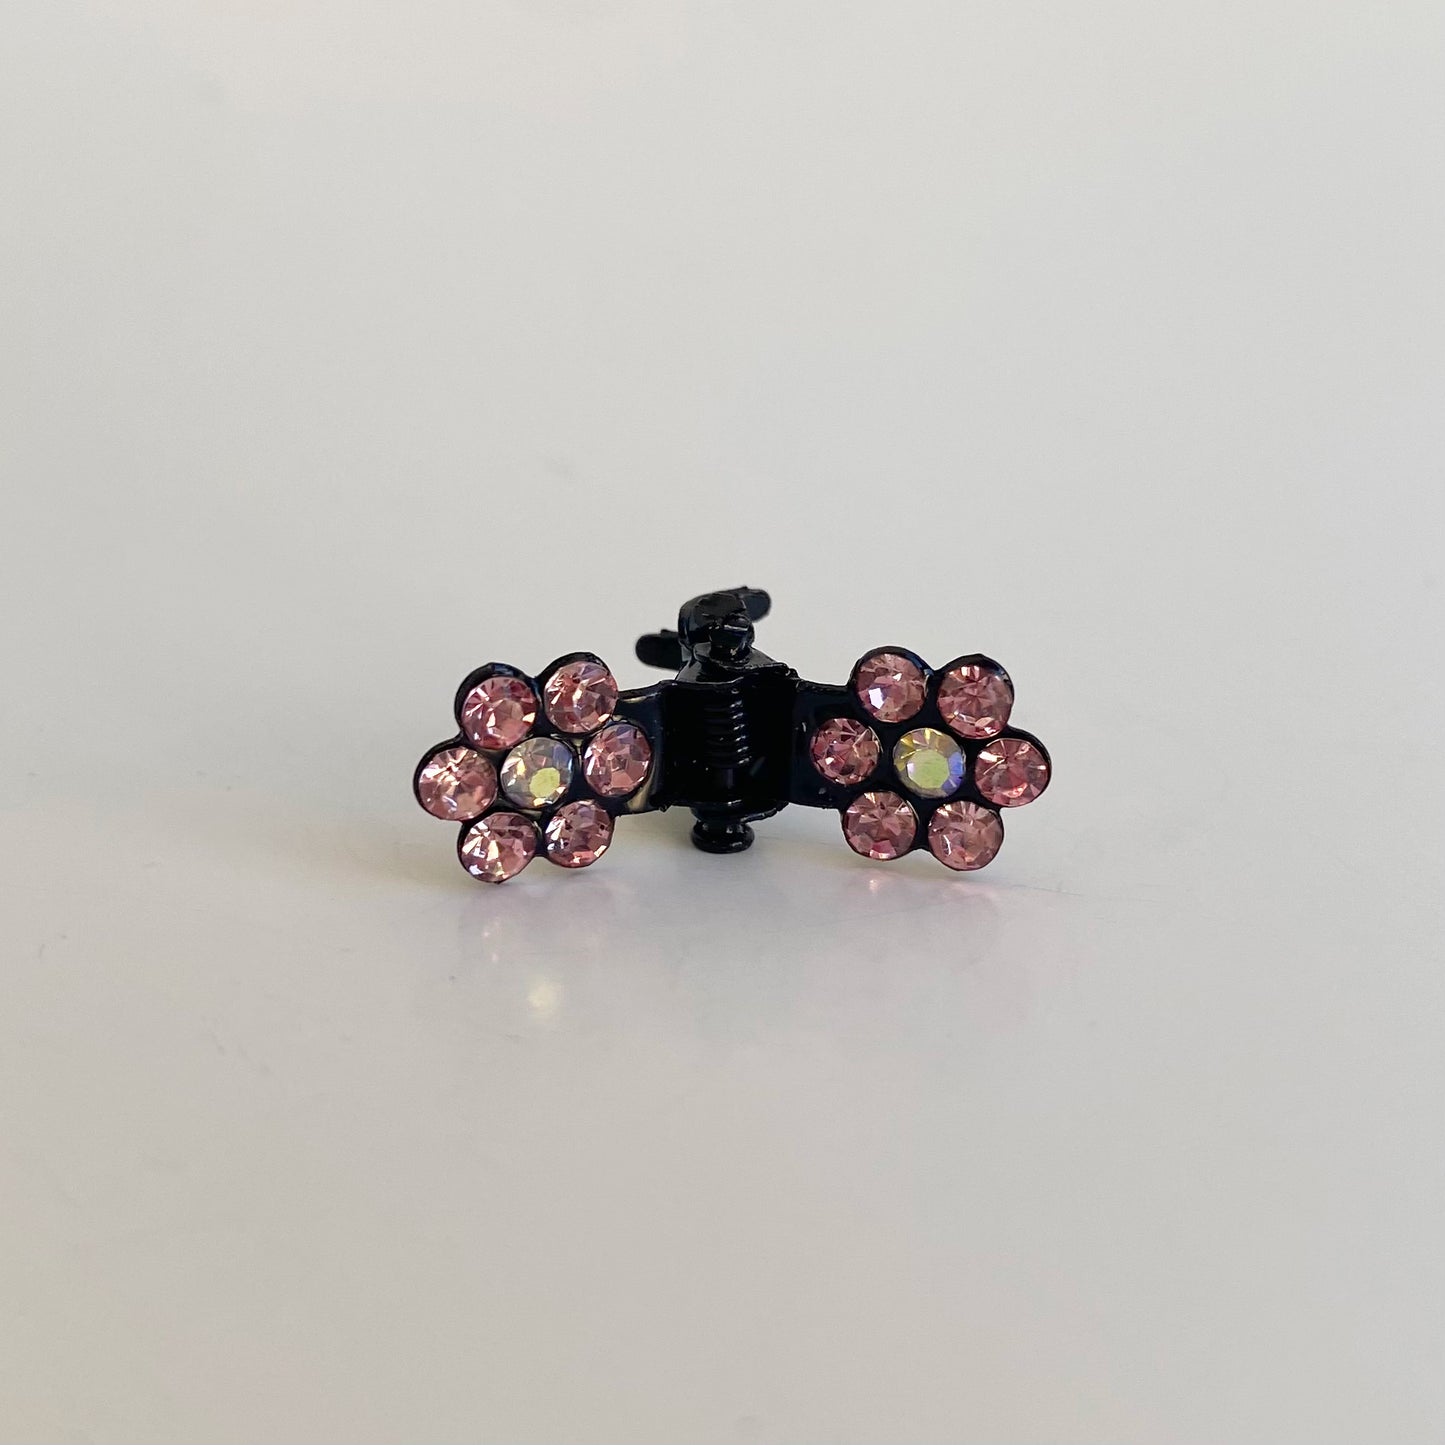 Small Rhinestone Flower Hair Clips  in pink